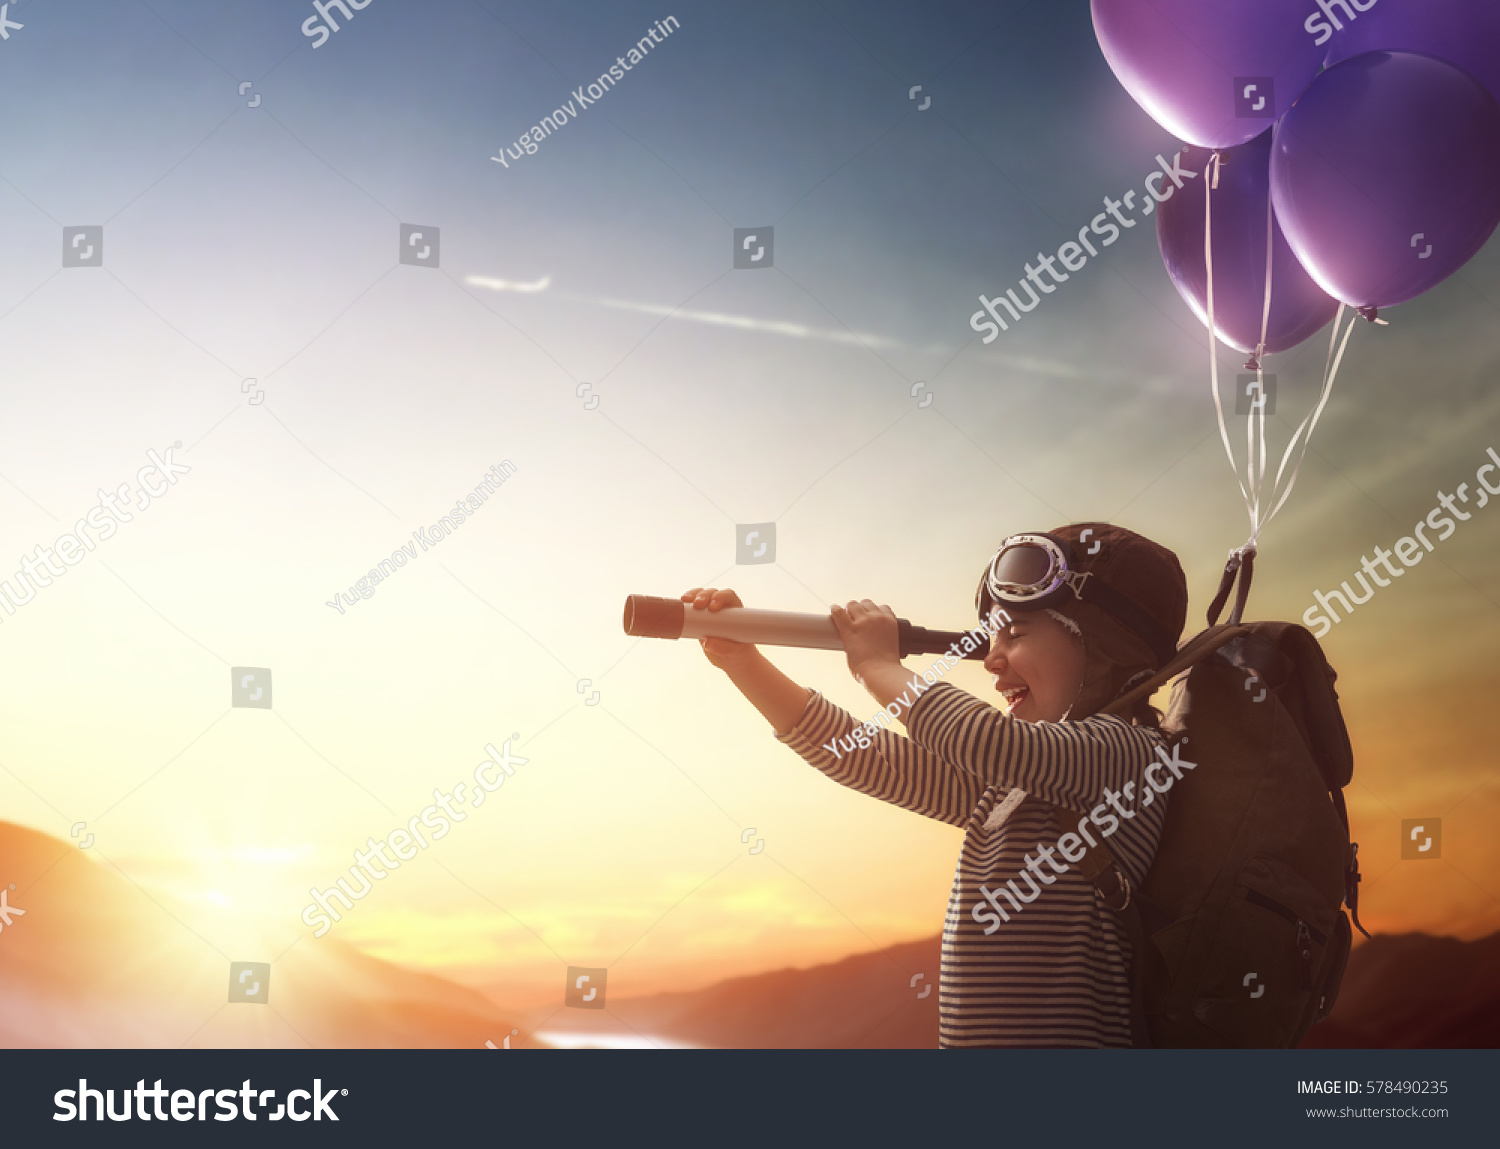 Dreams of travel! Child flying on balloons against the backdrop of a sunset. #578490235